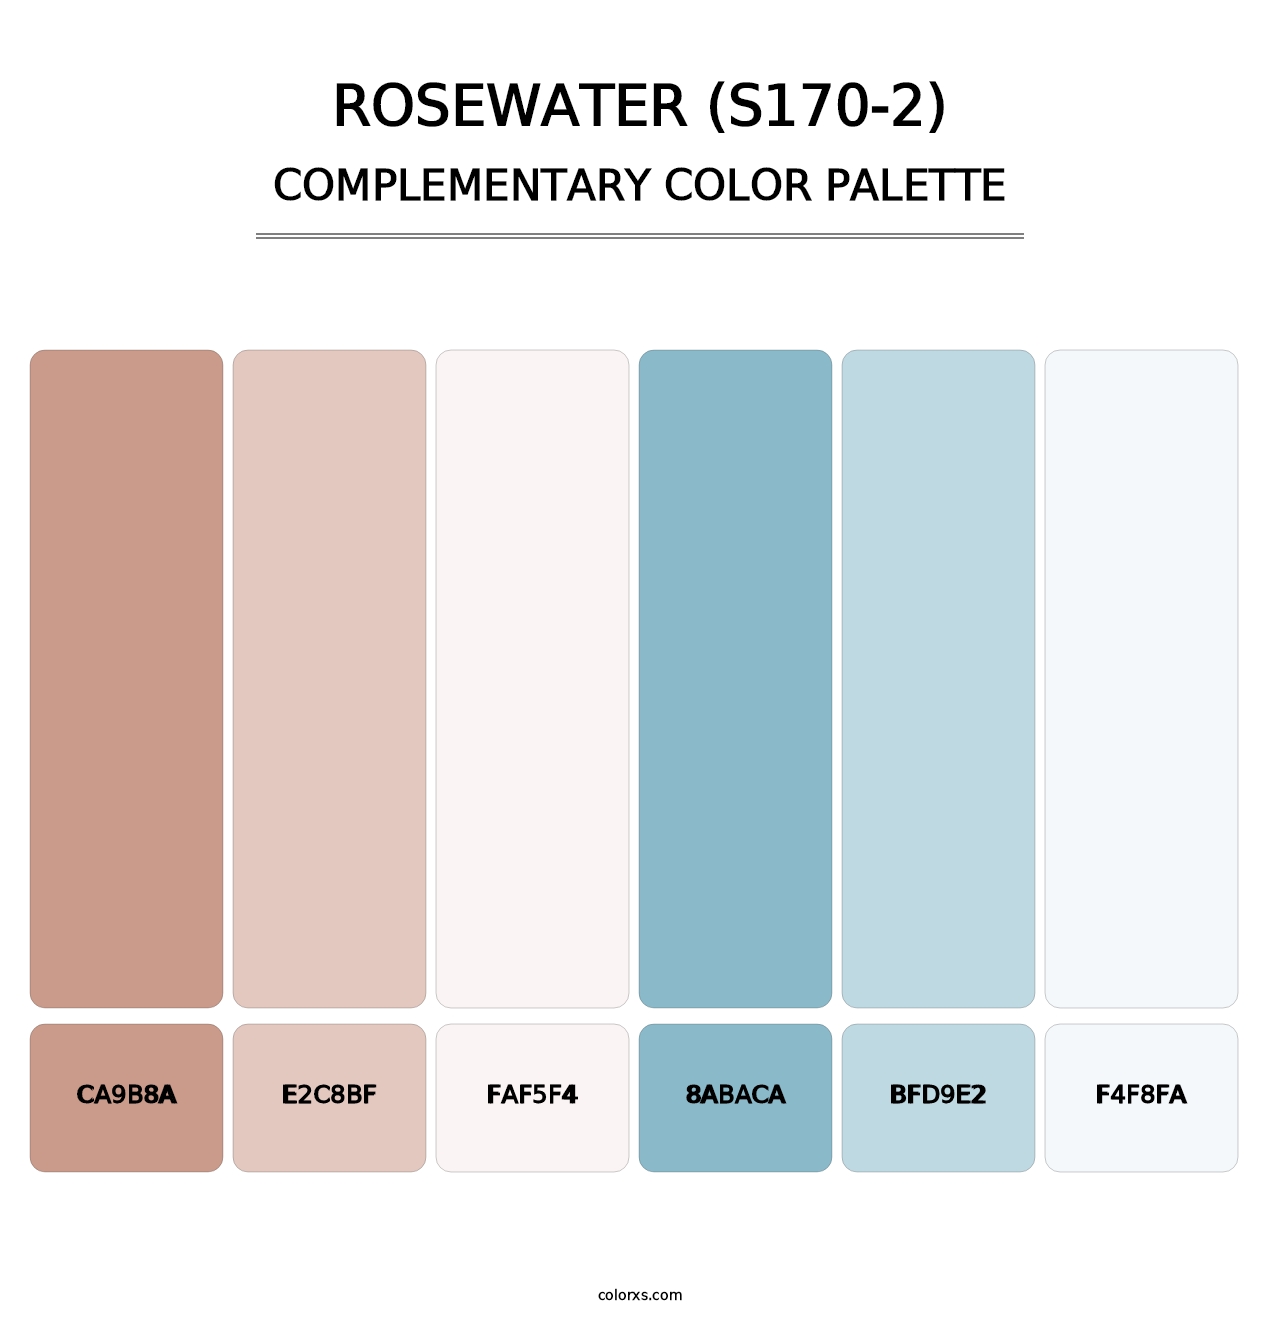 Rosewater (S170-2) - Complementary Color Palette